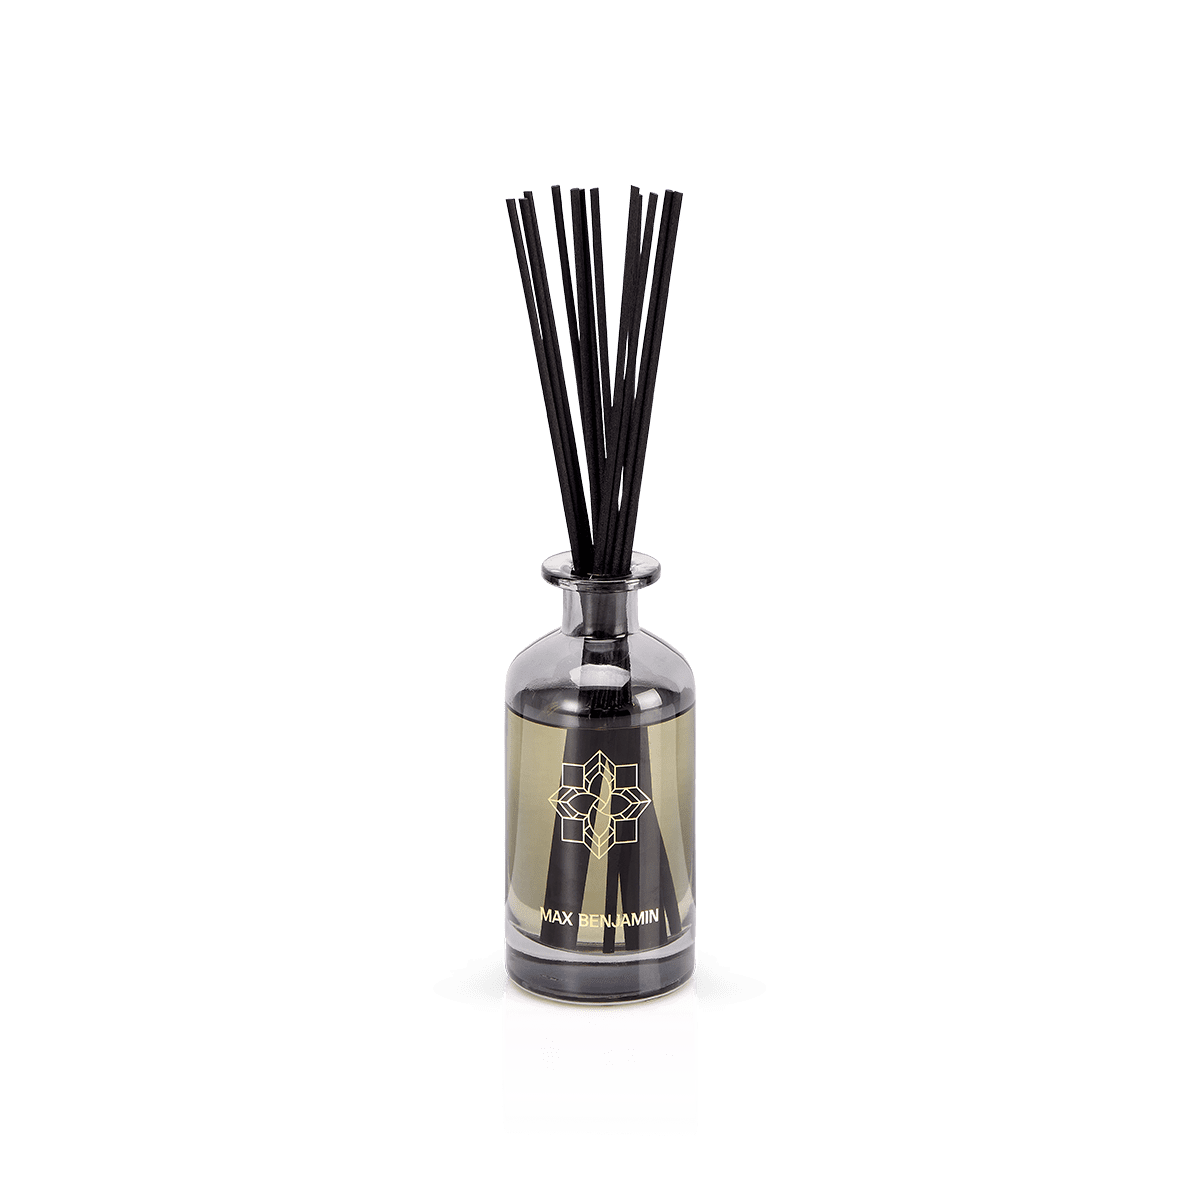 Max Benjamin Car Fragrance - French Linen – Modern Quests